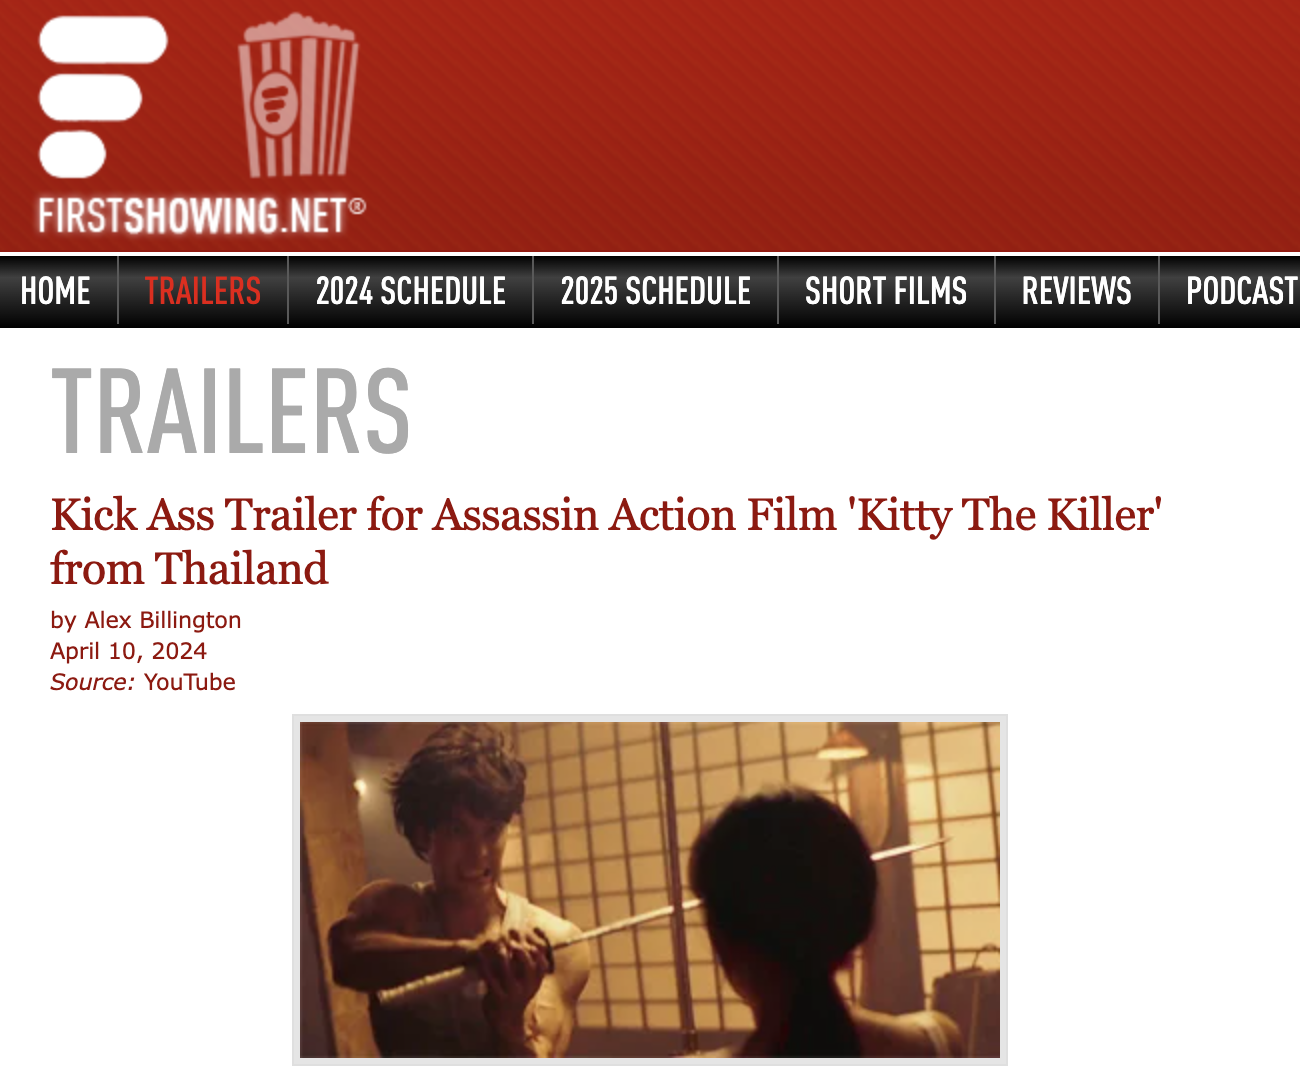 Kick Ass Trailer for Assassin Action Film 'Kitty The Killer' from Thailand